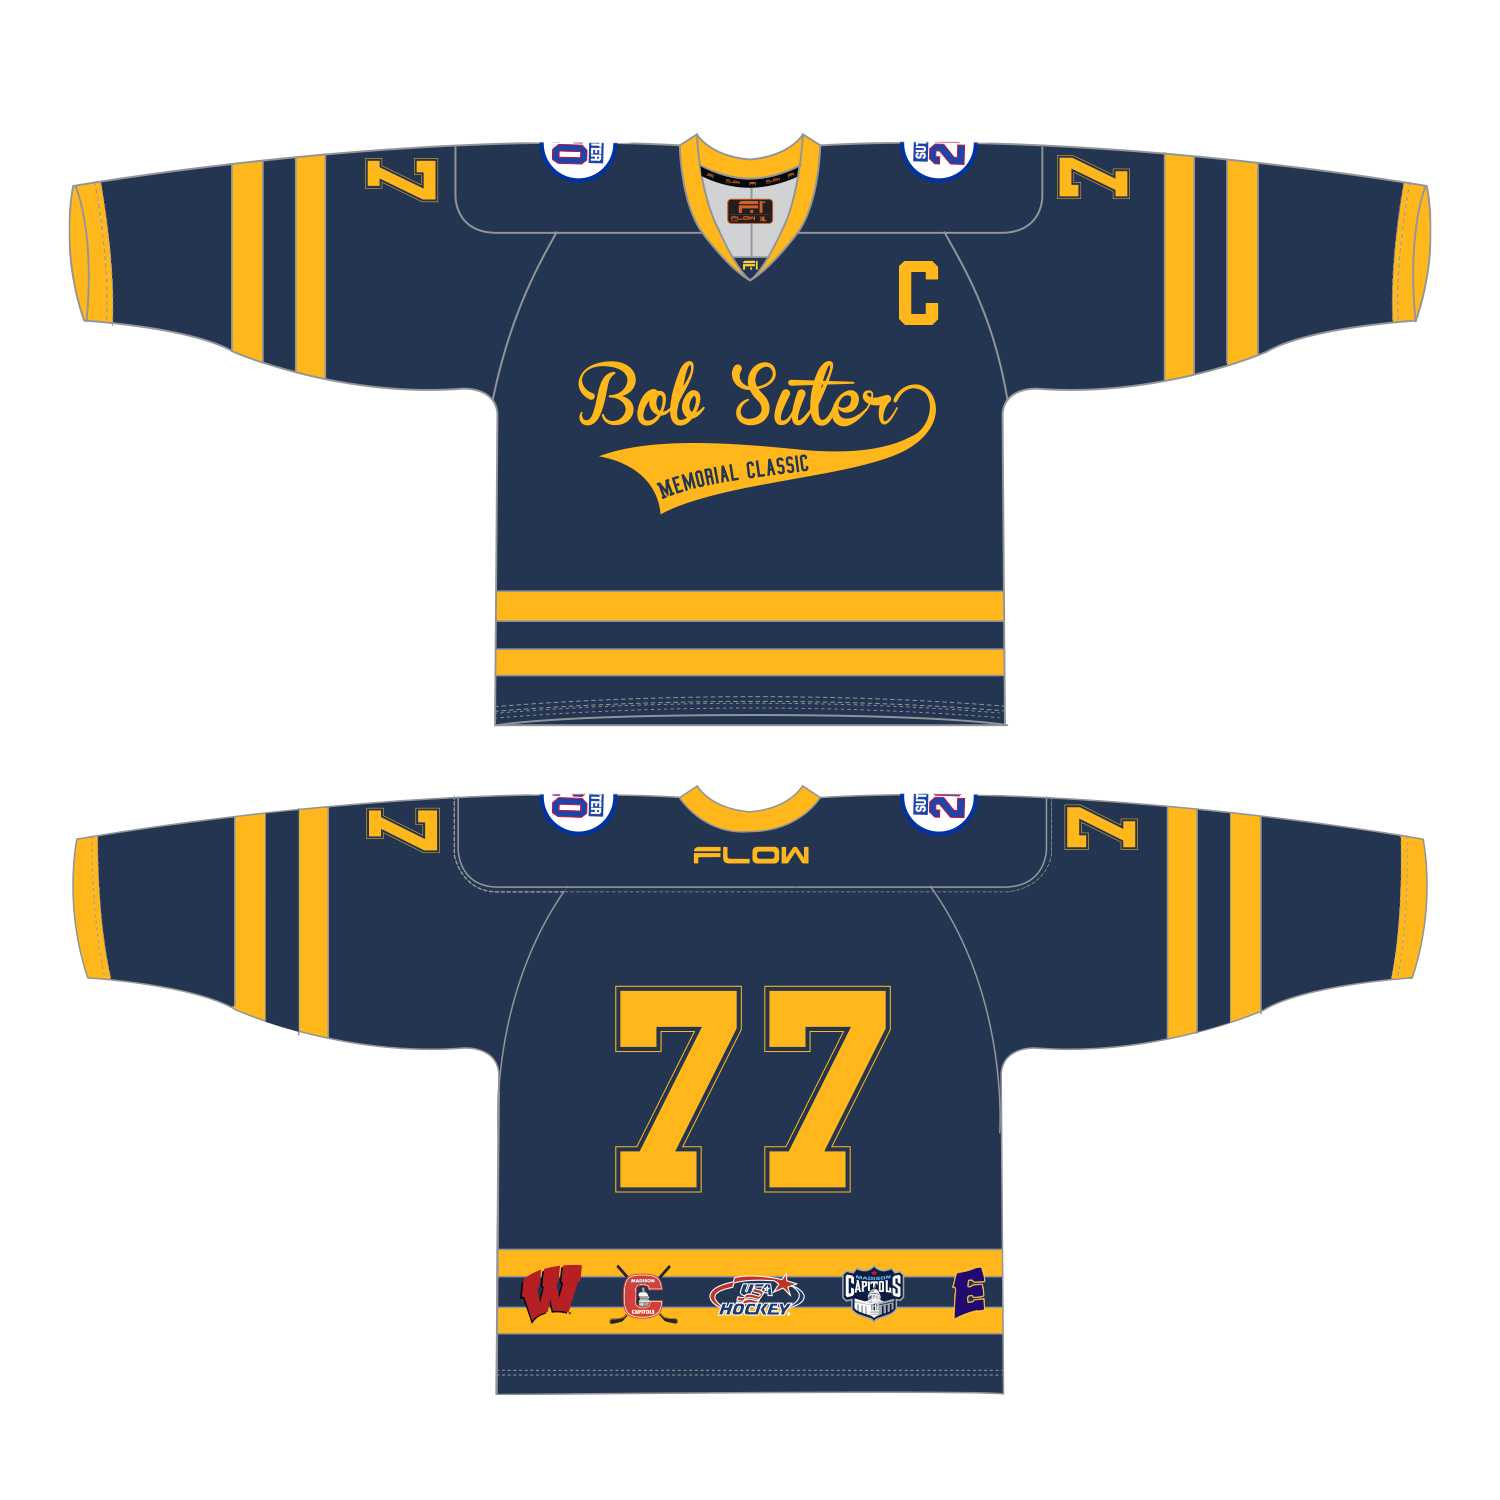 HOCKEY JERSEY CONCEPTS